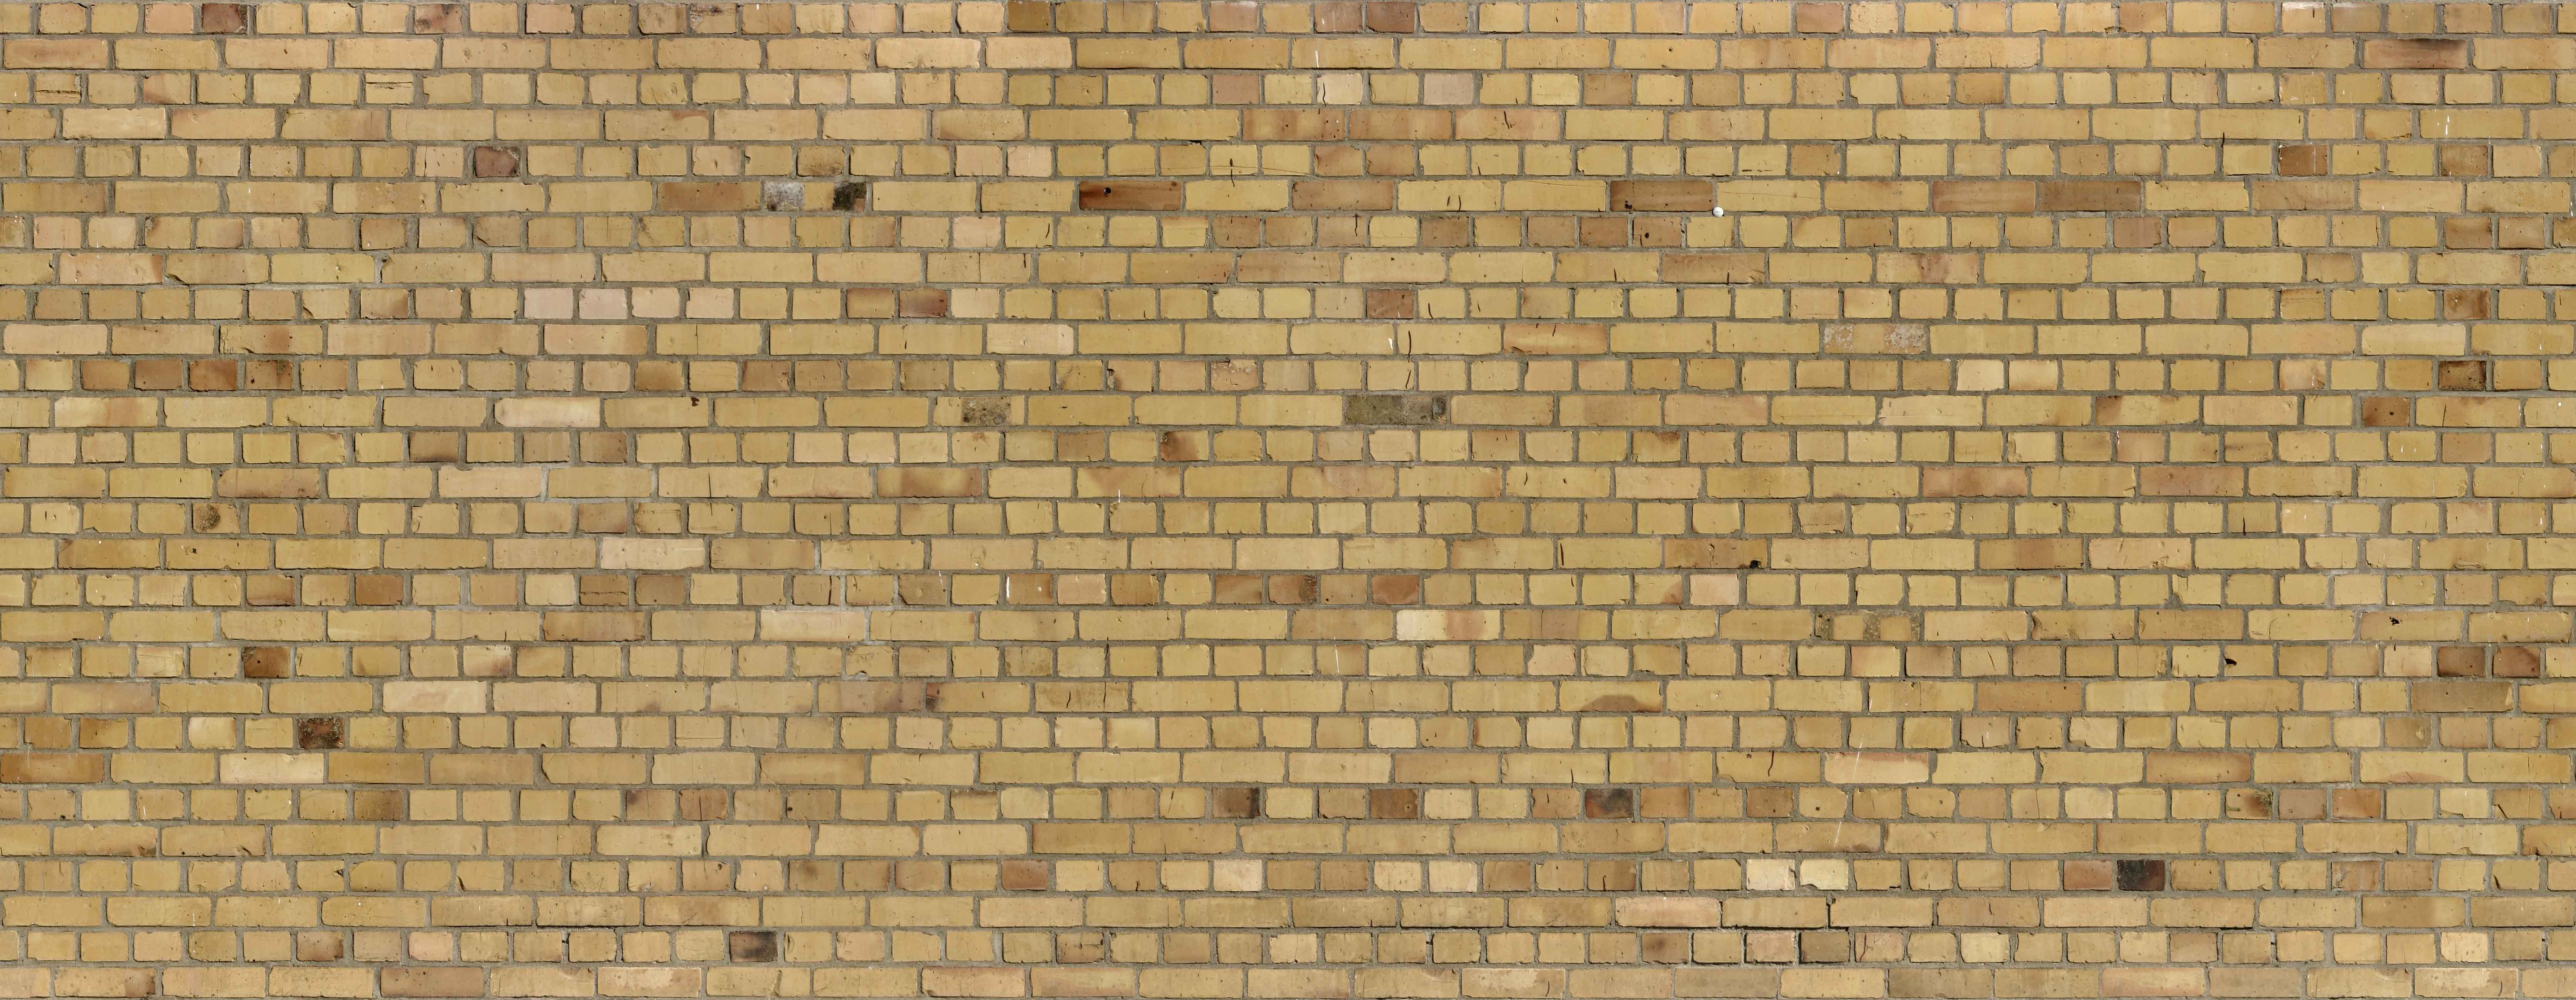 Brick Wall Texture – Free Seamless Textures - All rights reseved